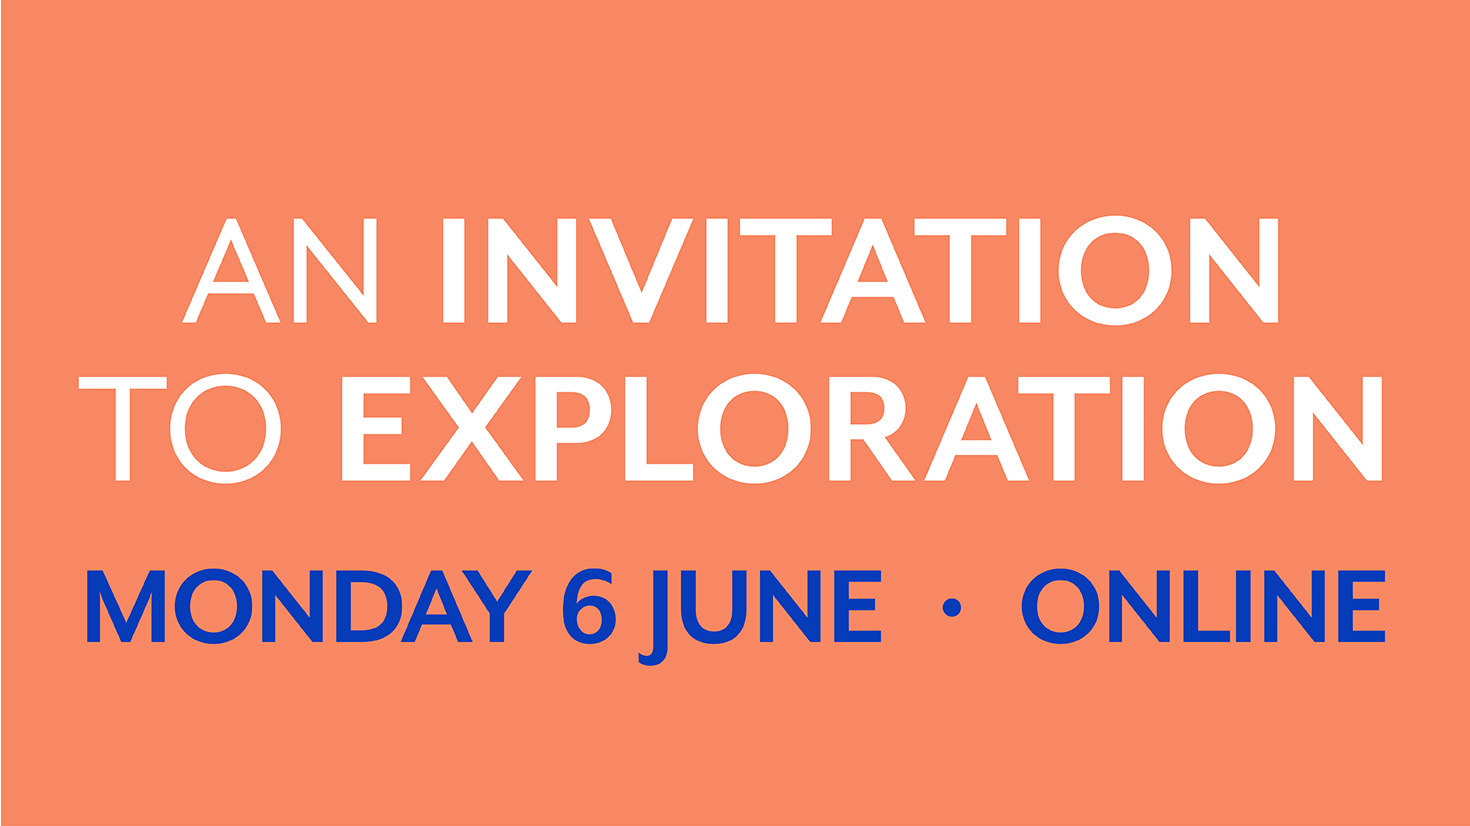 Event: An Invitation to Exploration